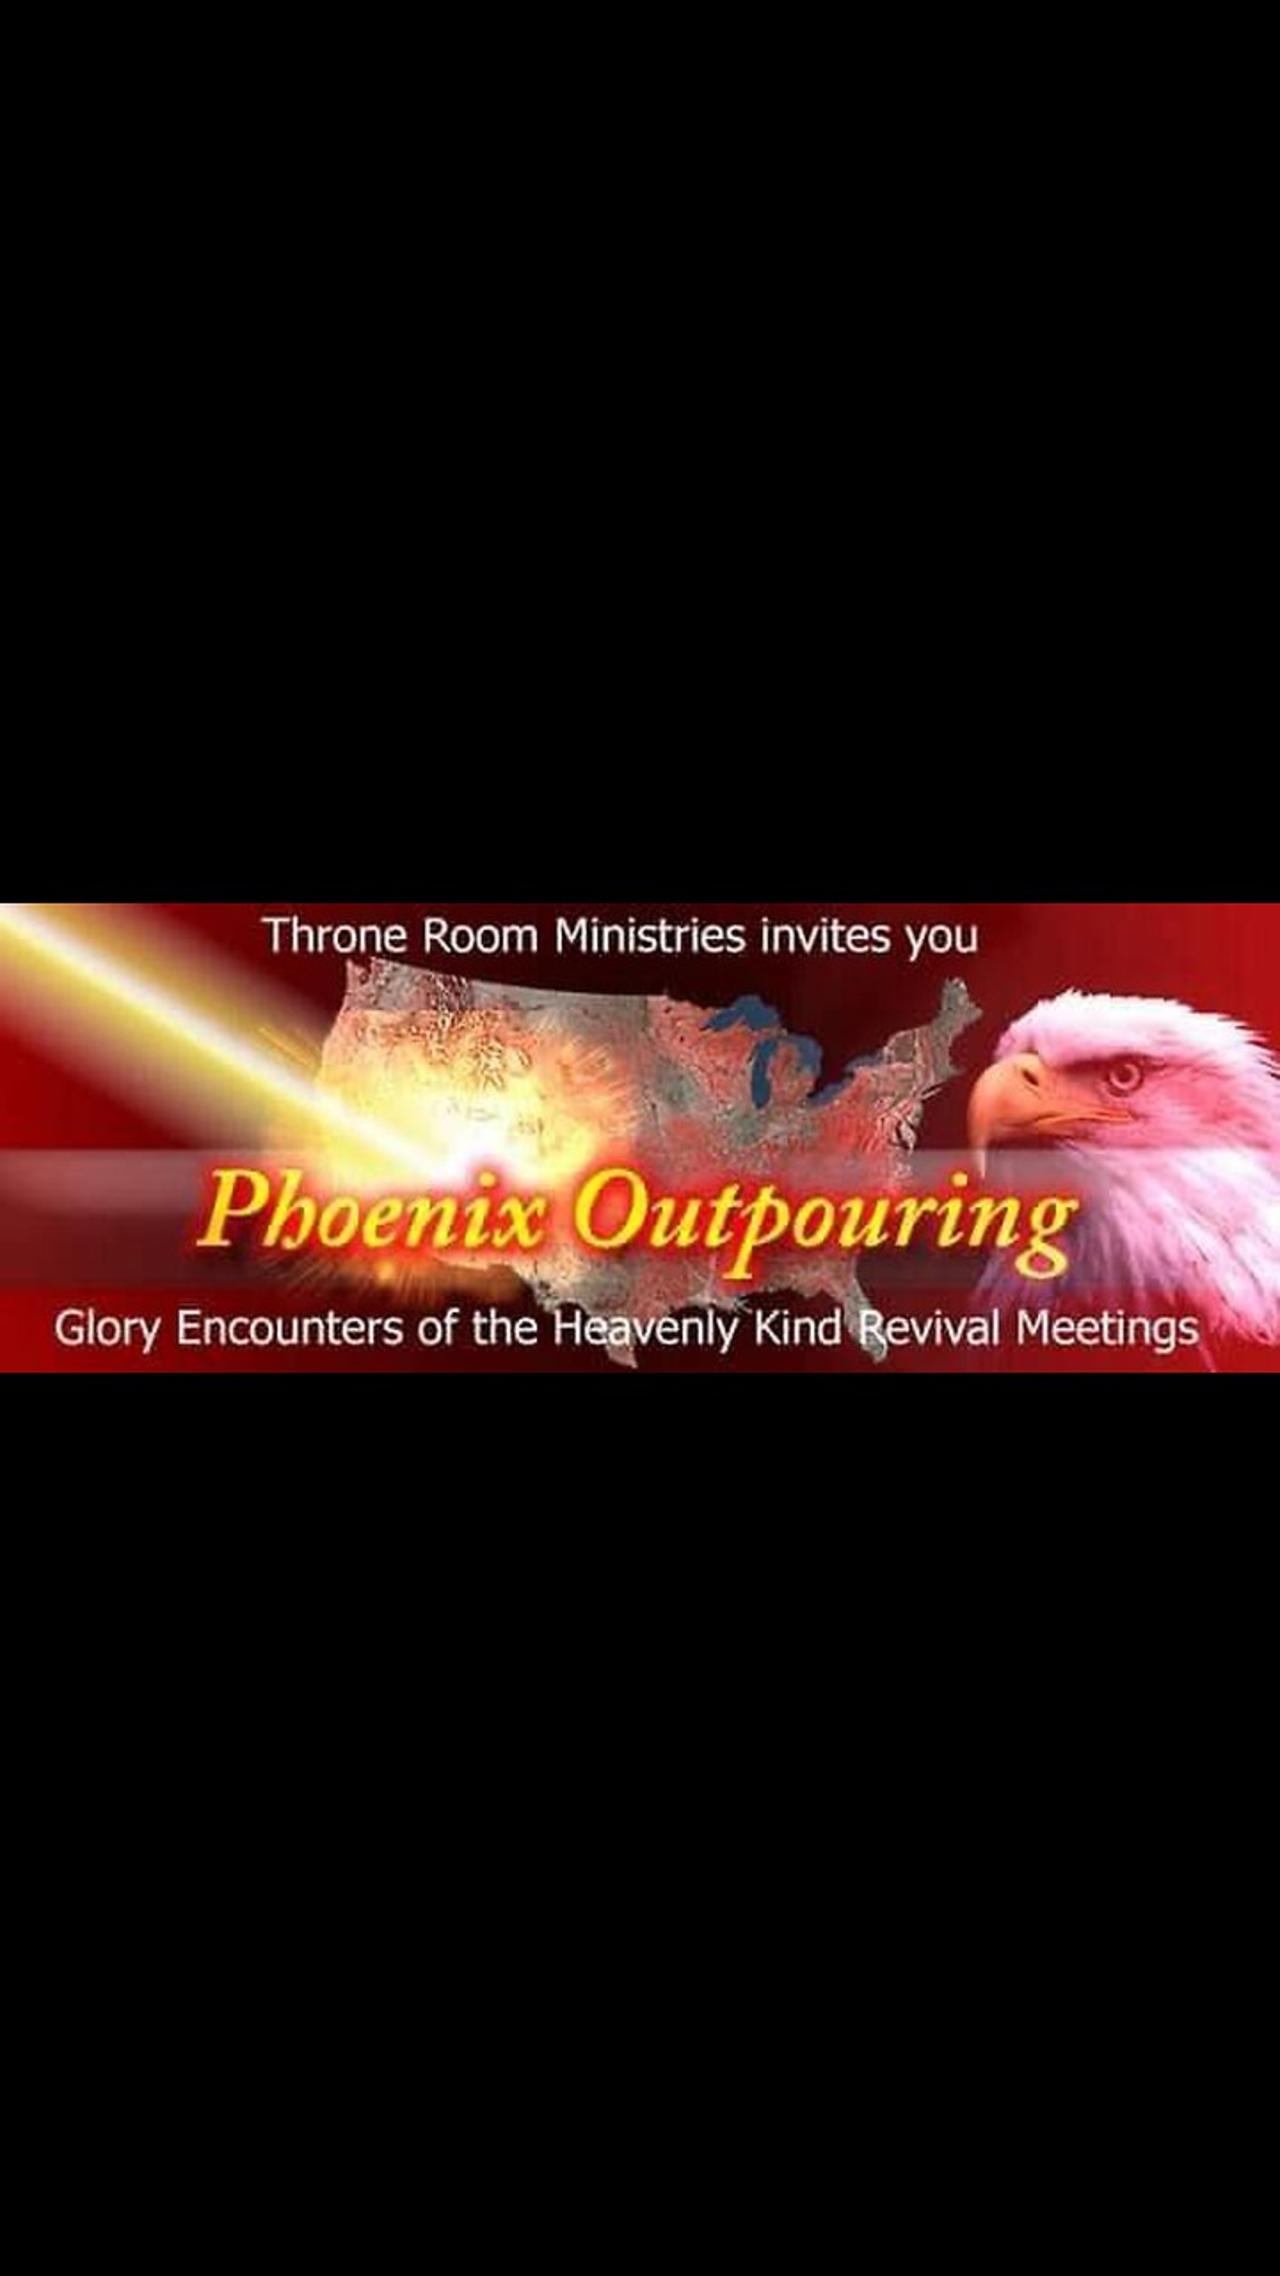 Springs of Living Water Church / Throne Room Ministries